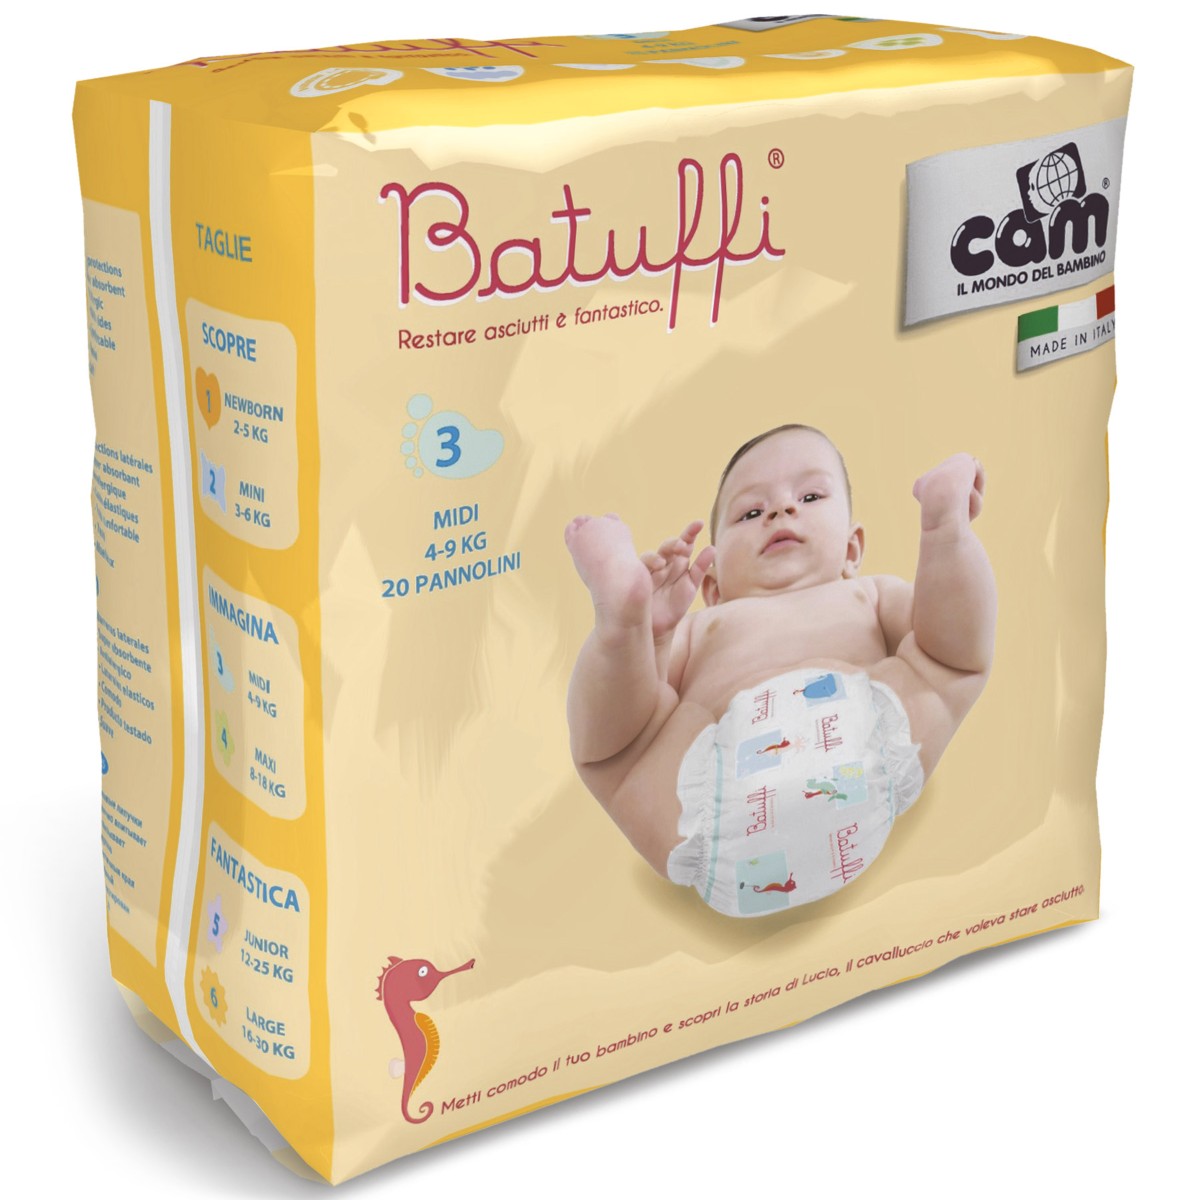 Cam Batuffi Midi DiaperaCam - Baby Batuffi Midium Diaper, Babies/Infant/ Hyperallergenic, clinically, disposable, softest absorption, leakproof, Ultimate skin care, protection from 3 months 4 to 9 kg - Light blue